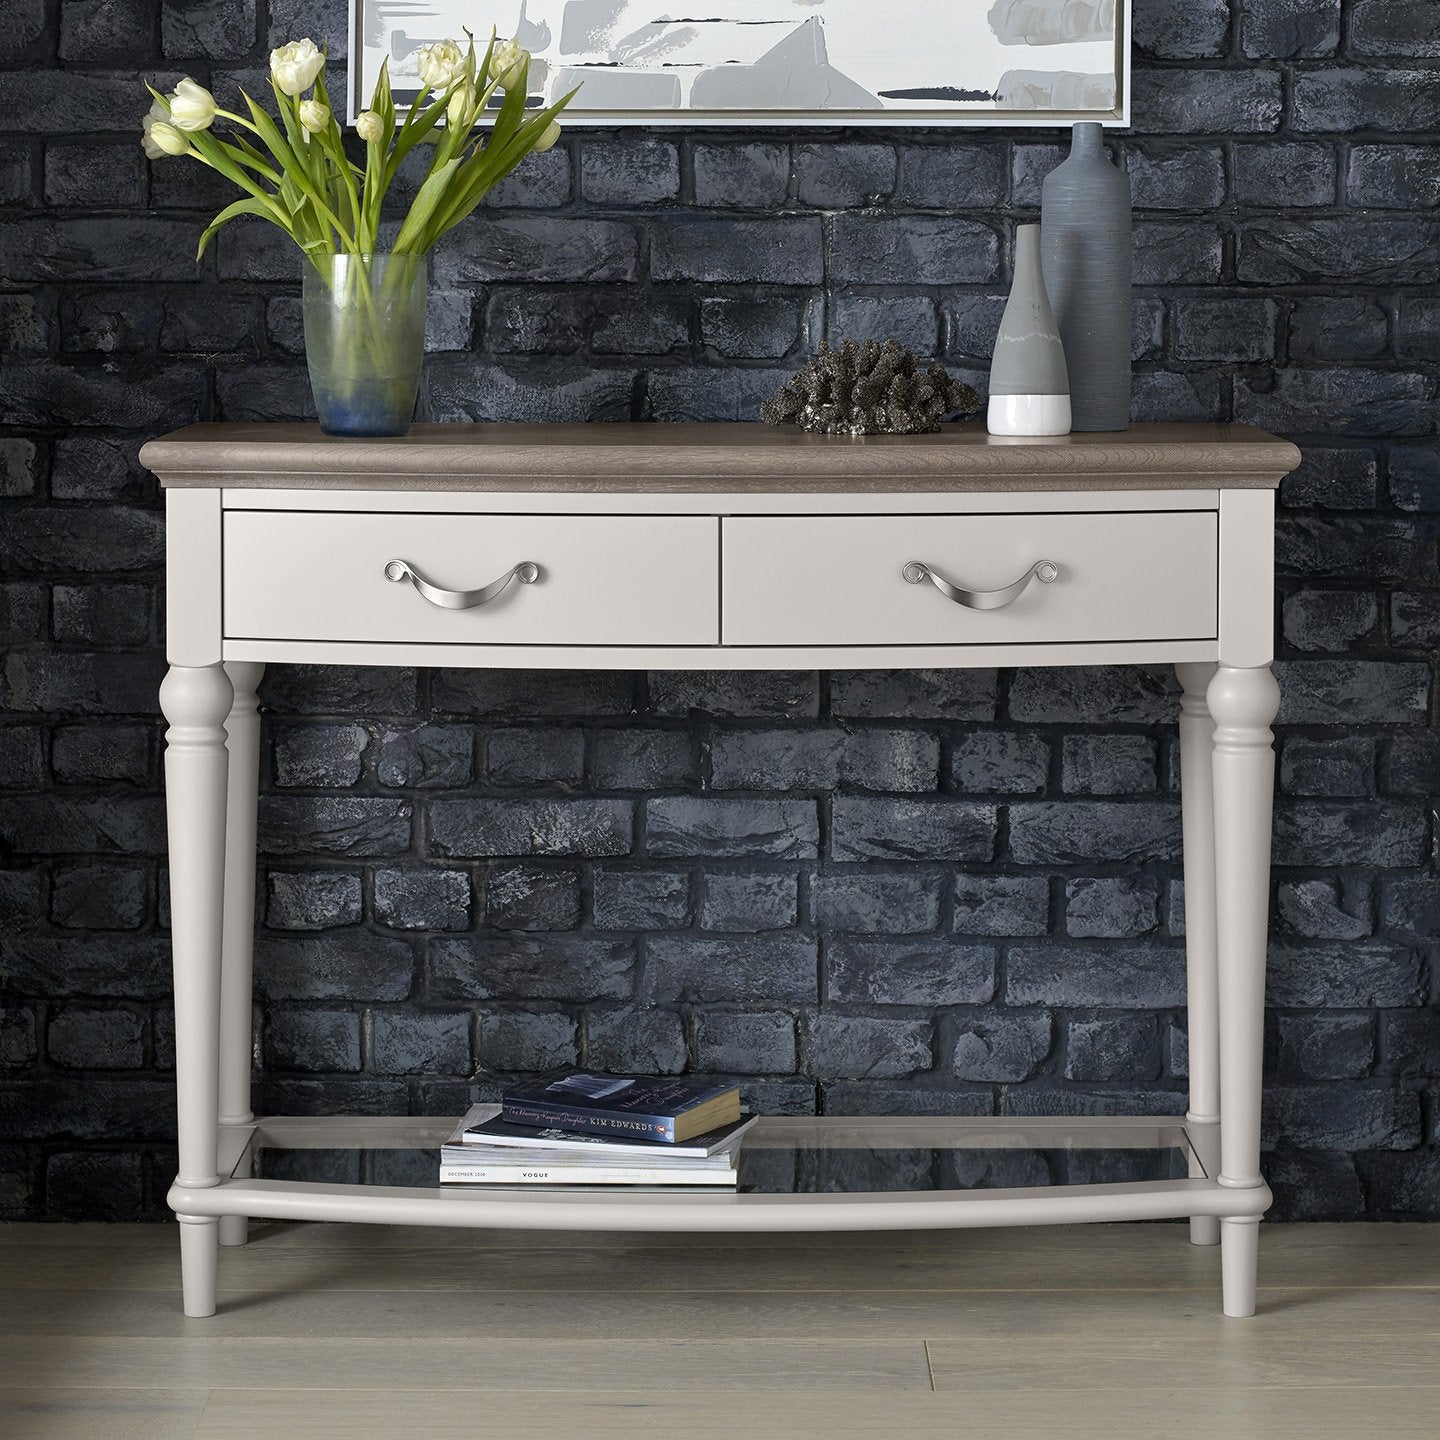 Montreux Console Table - Soft Grey from Upstairs Downstairs Furniture in Lisburn, Monaghan and Enniskillen